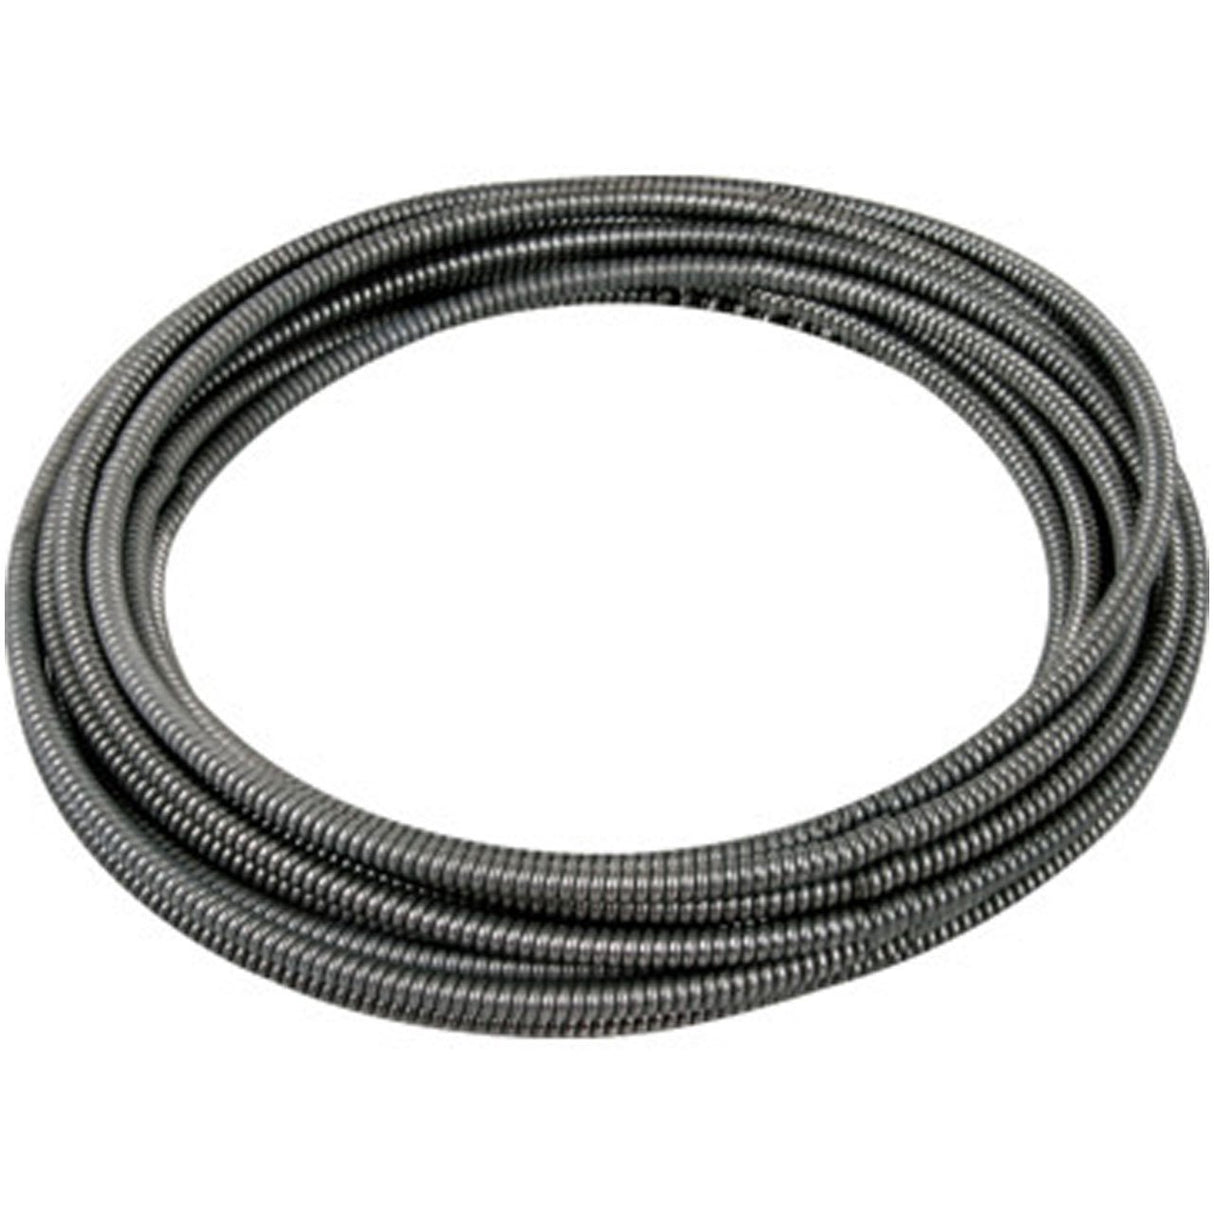 General Wire L-25FL1-A-DH 25' x 5/16" Down Head Replacement Flexicore Cables for Hand Tools (Handles Sold Separately)